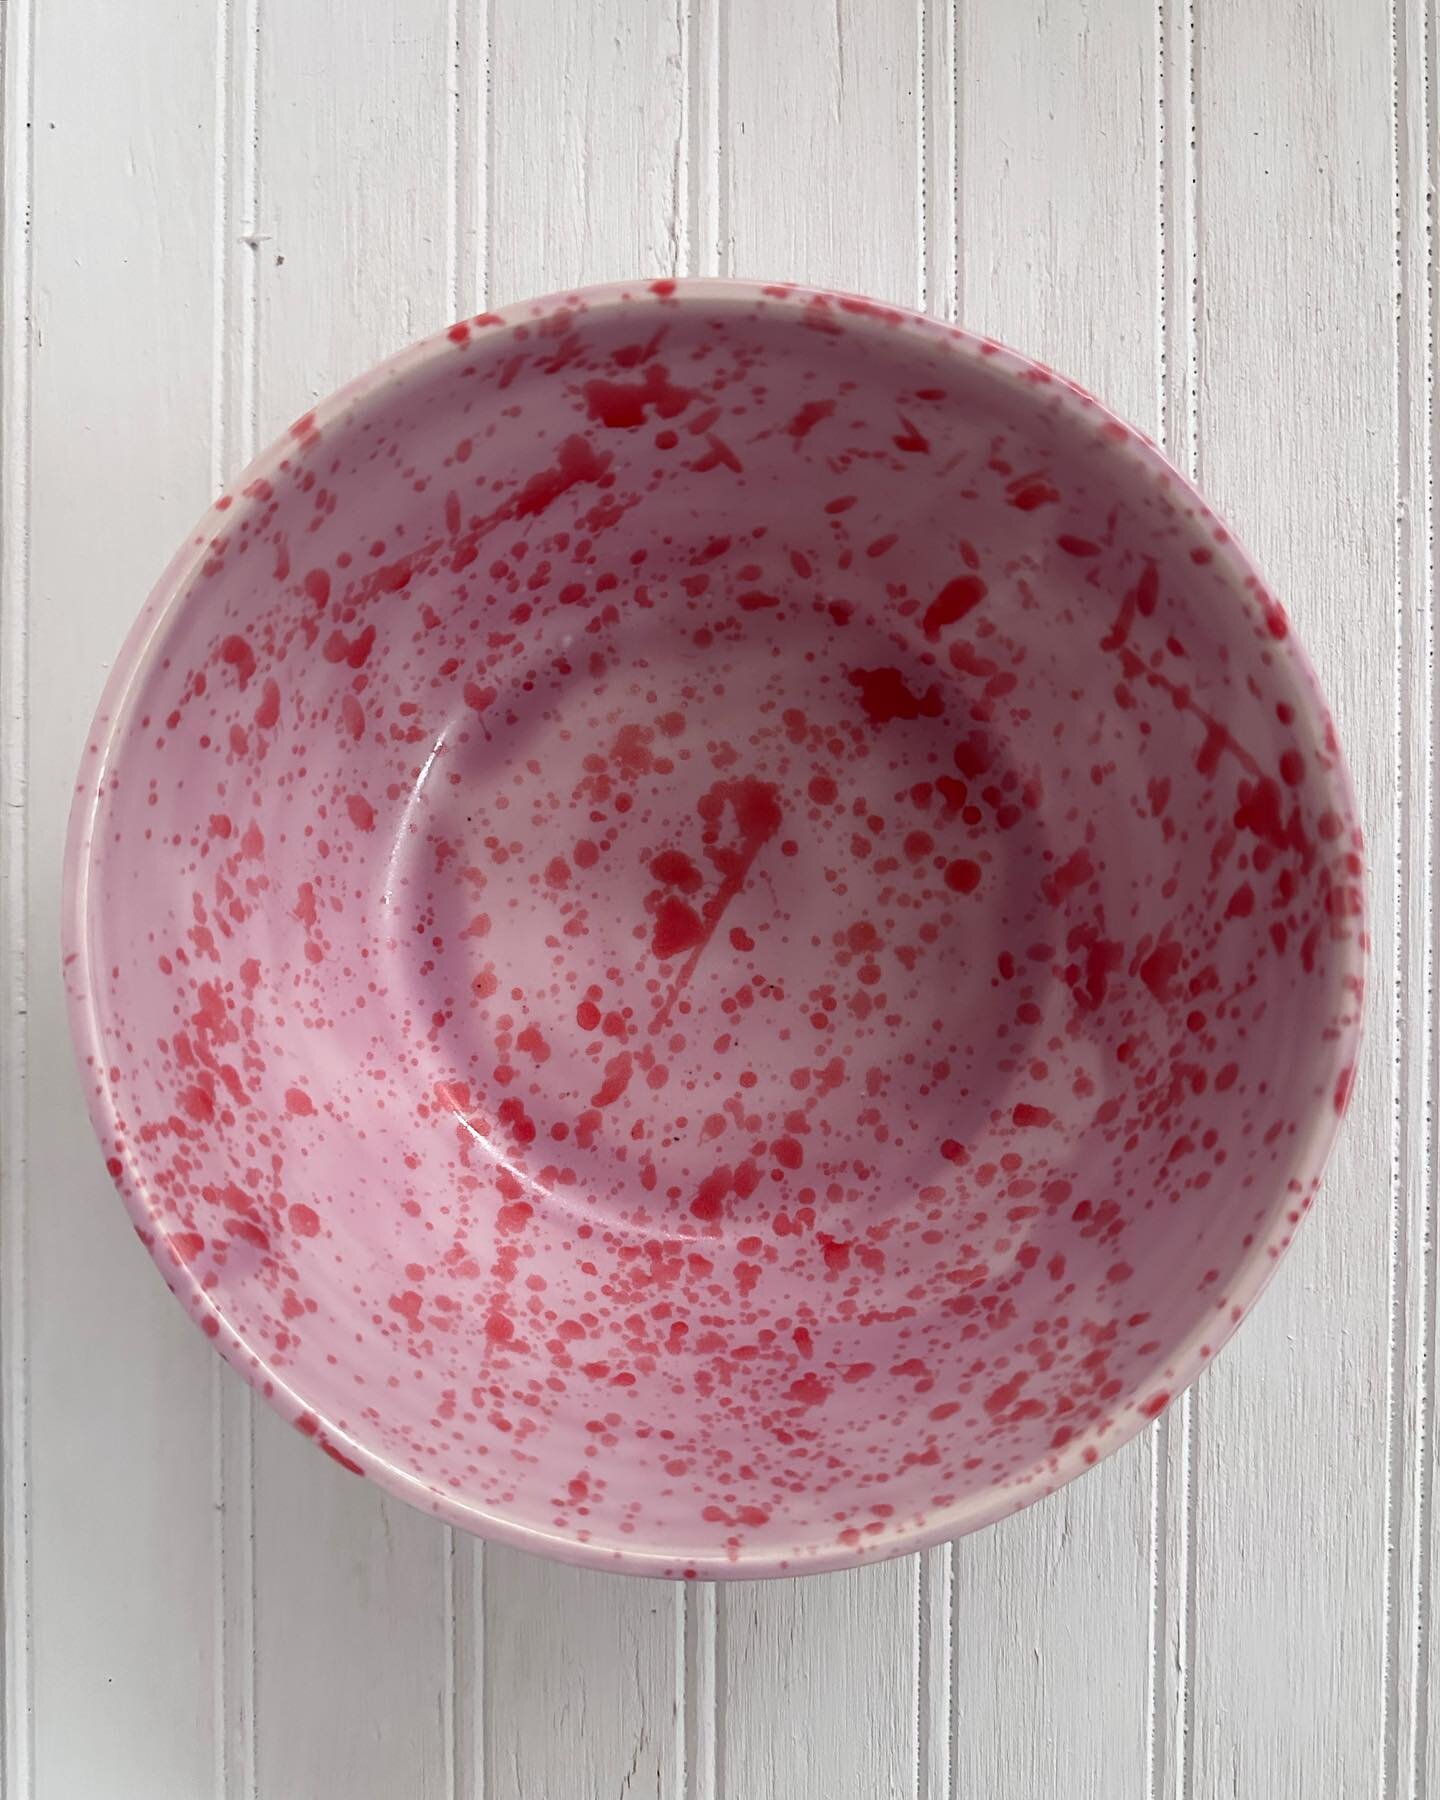 Lavender and Red Egg bowls. My new favorite color combo!